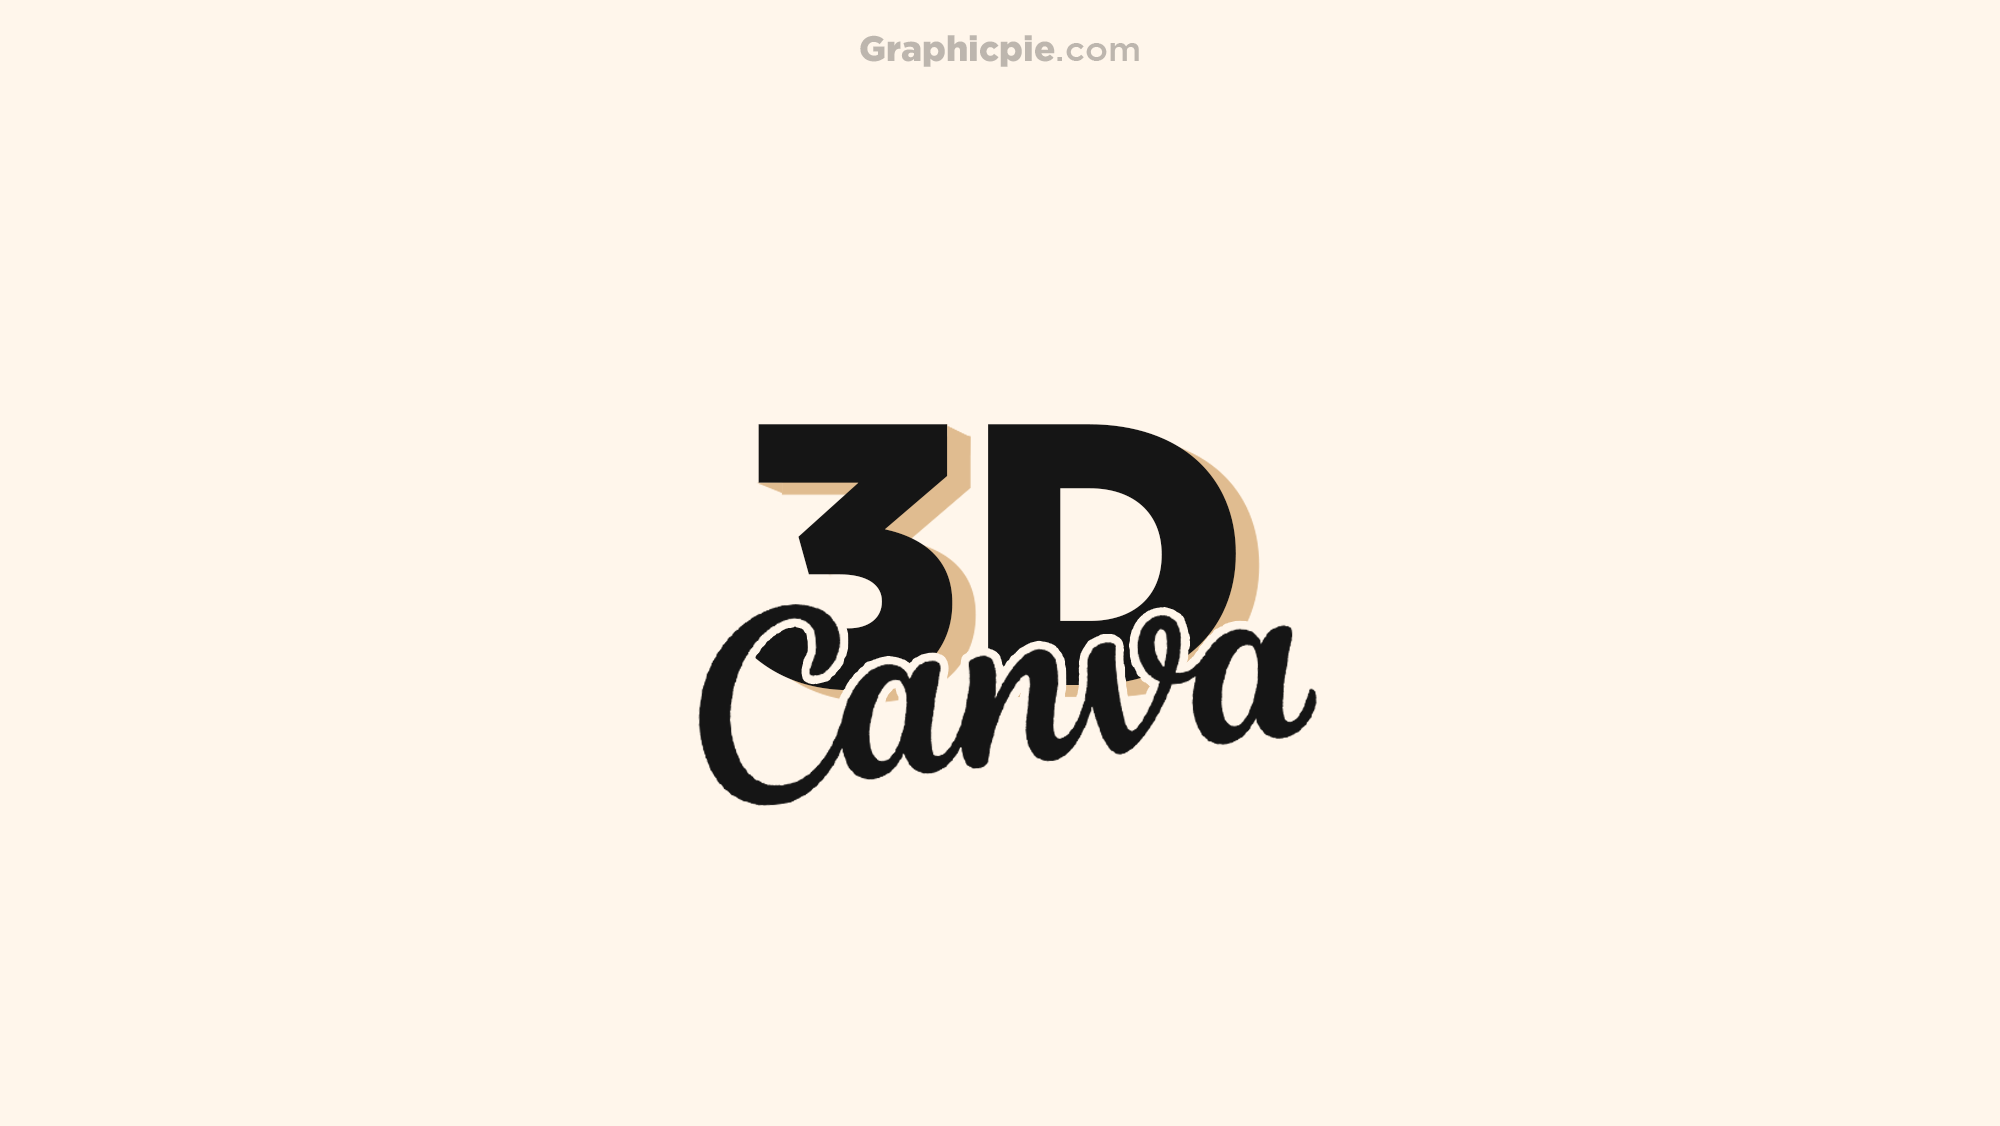 how-to-create-3d-texts-in-canva-easy-graphic-pie